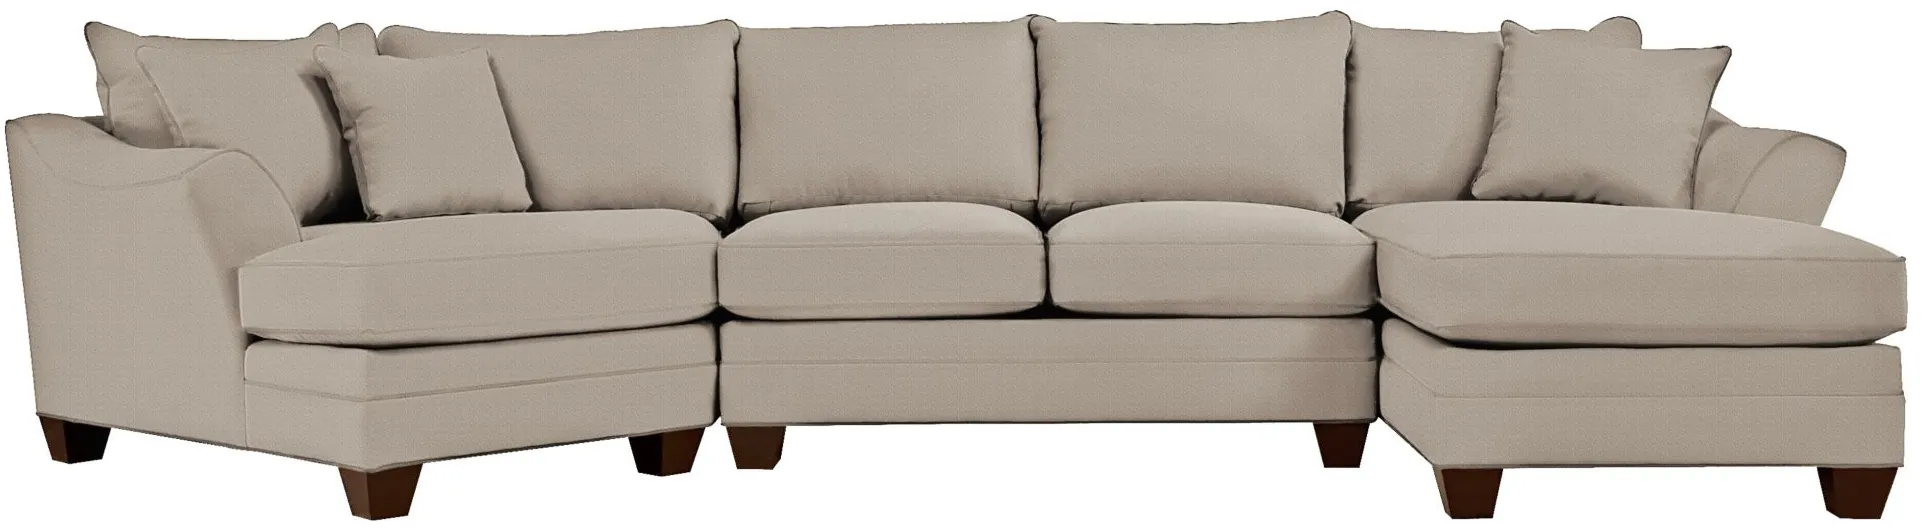 Foresthill 3-pc. Right Hand Facing Sectional Sofa in Suede So Soft Lt Taupe by H.M. Richards